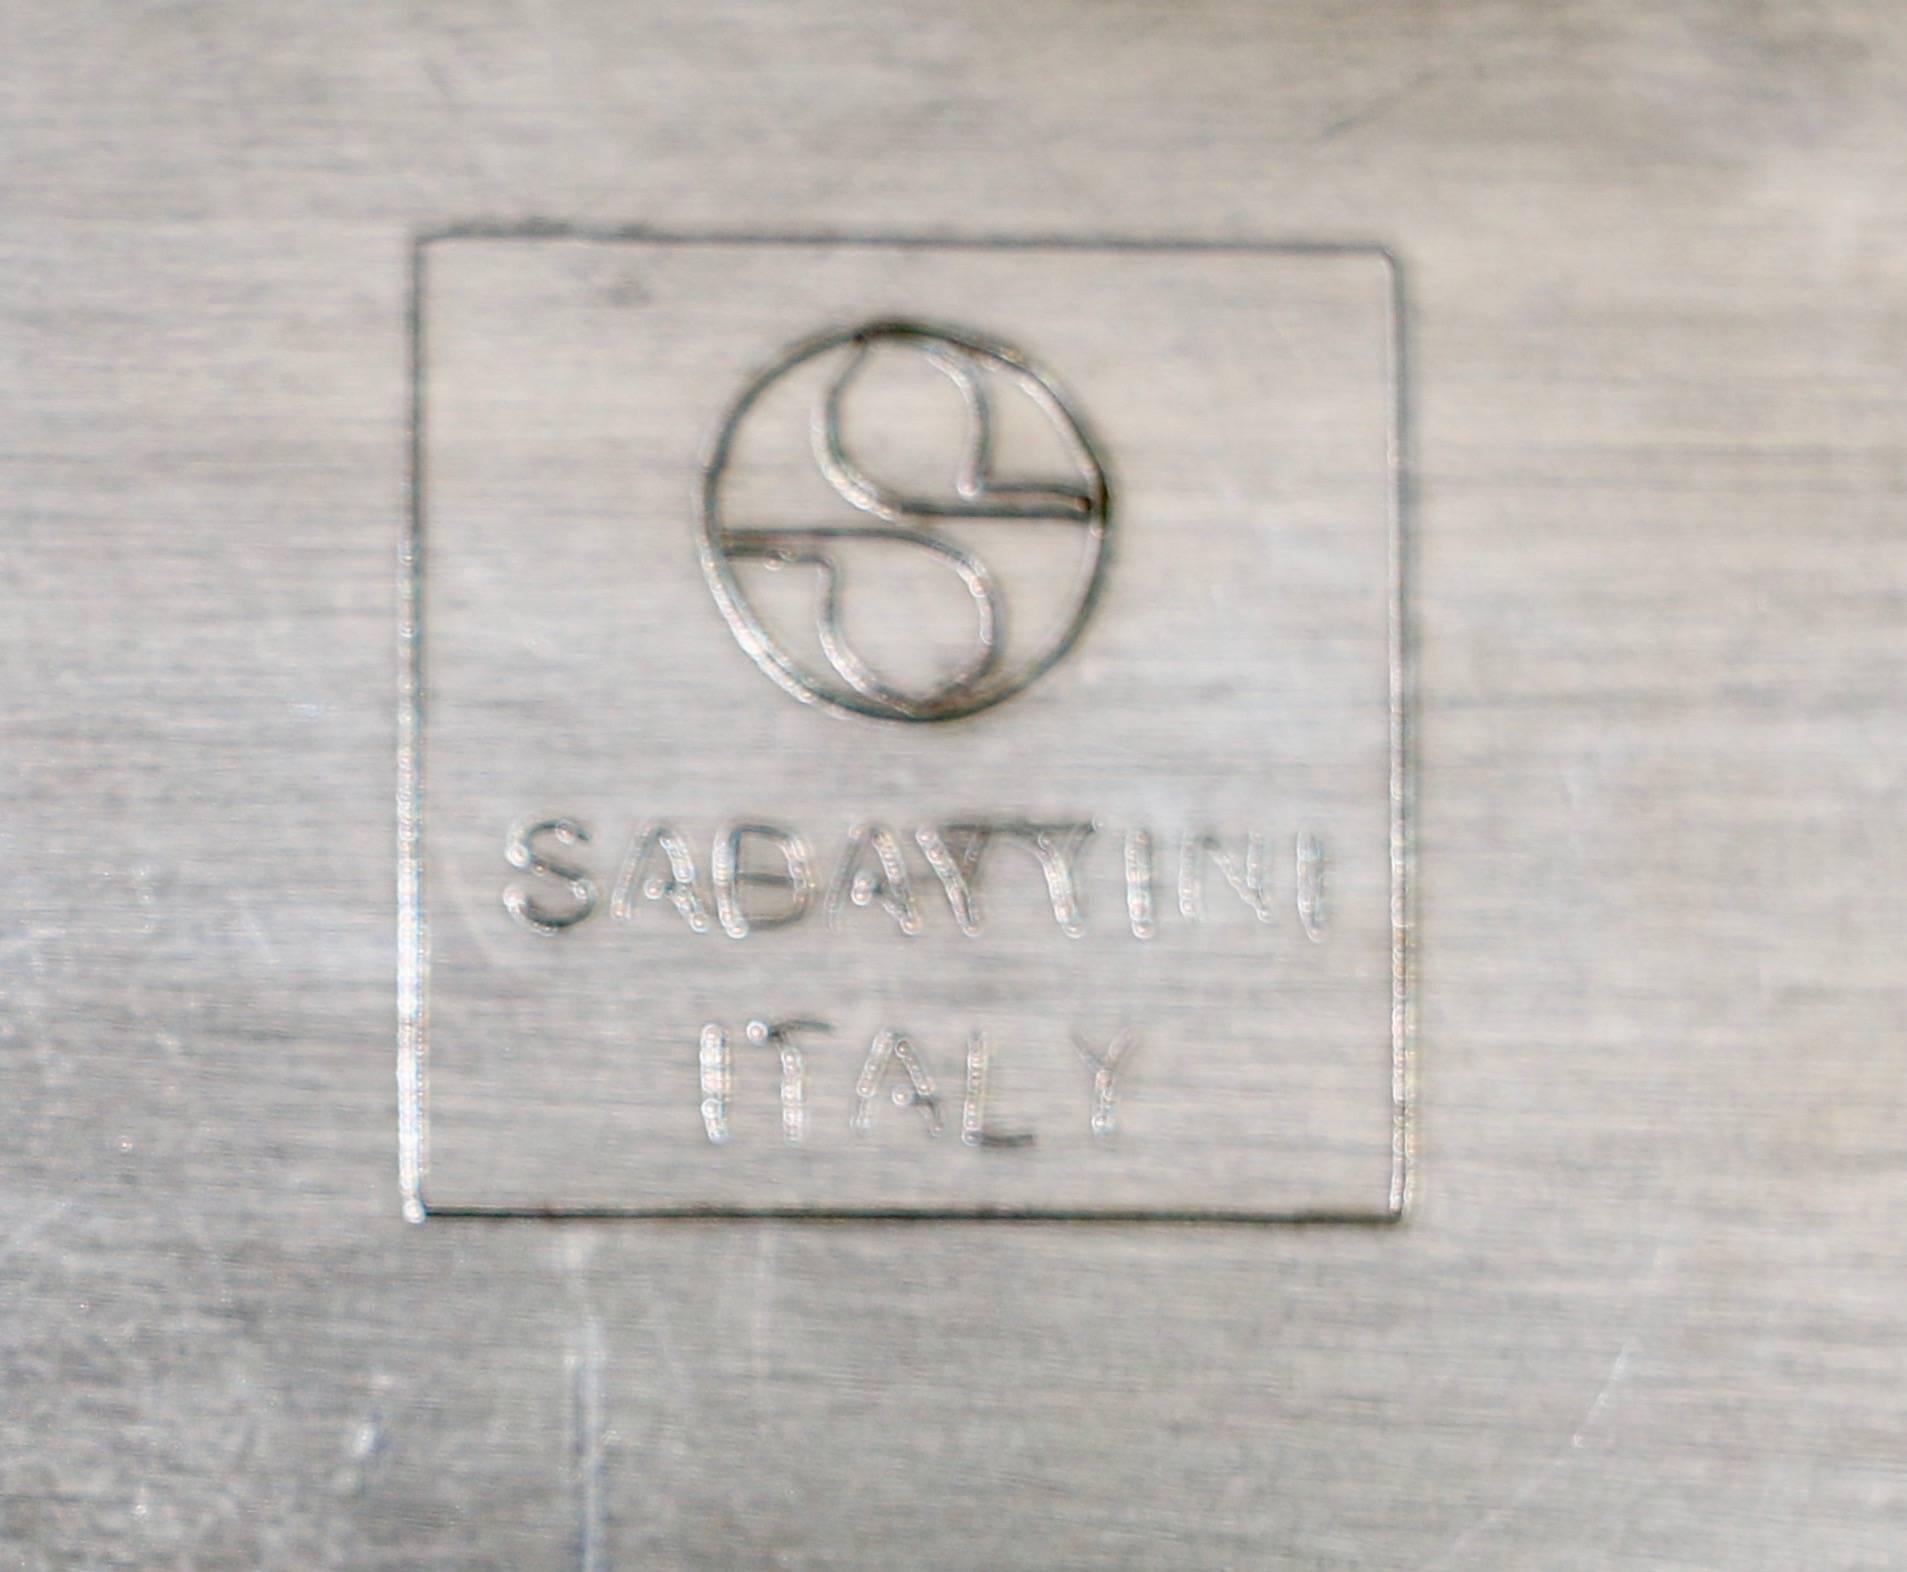 Italy, 2001, Sabattini. Palma Servitor model. Silvered metal plate with a leave shape.